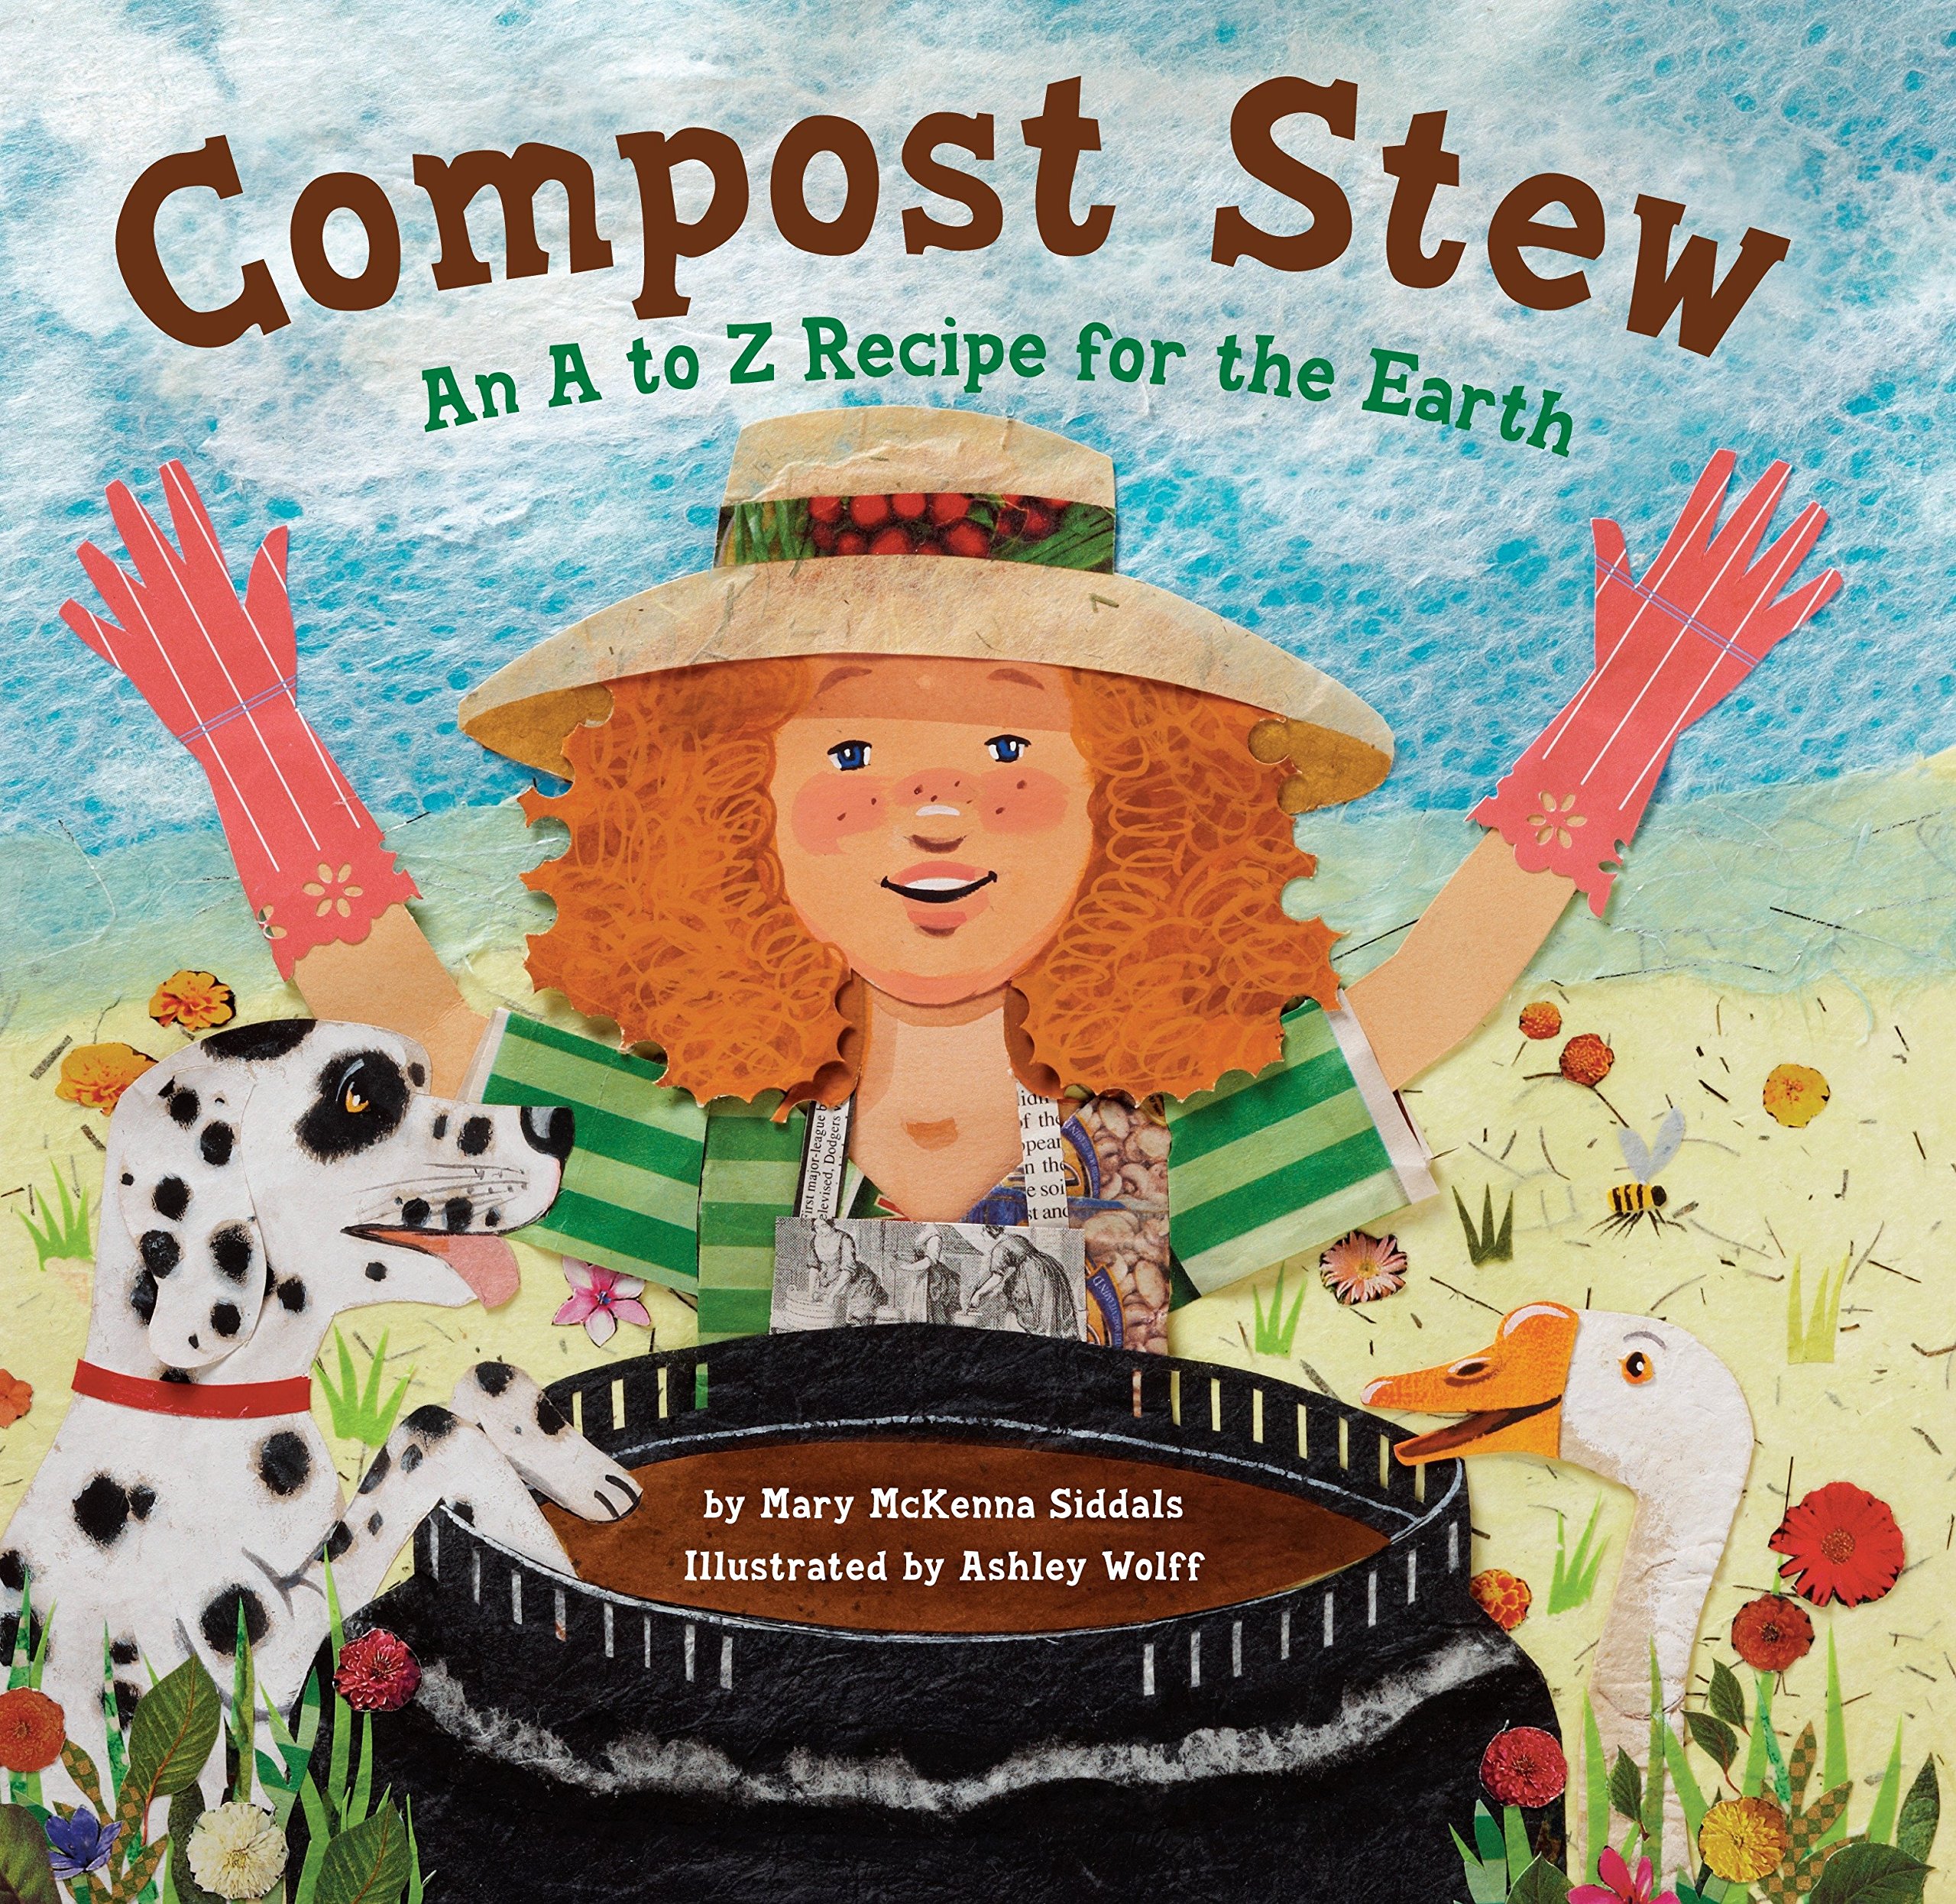 Compost Stew link